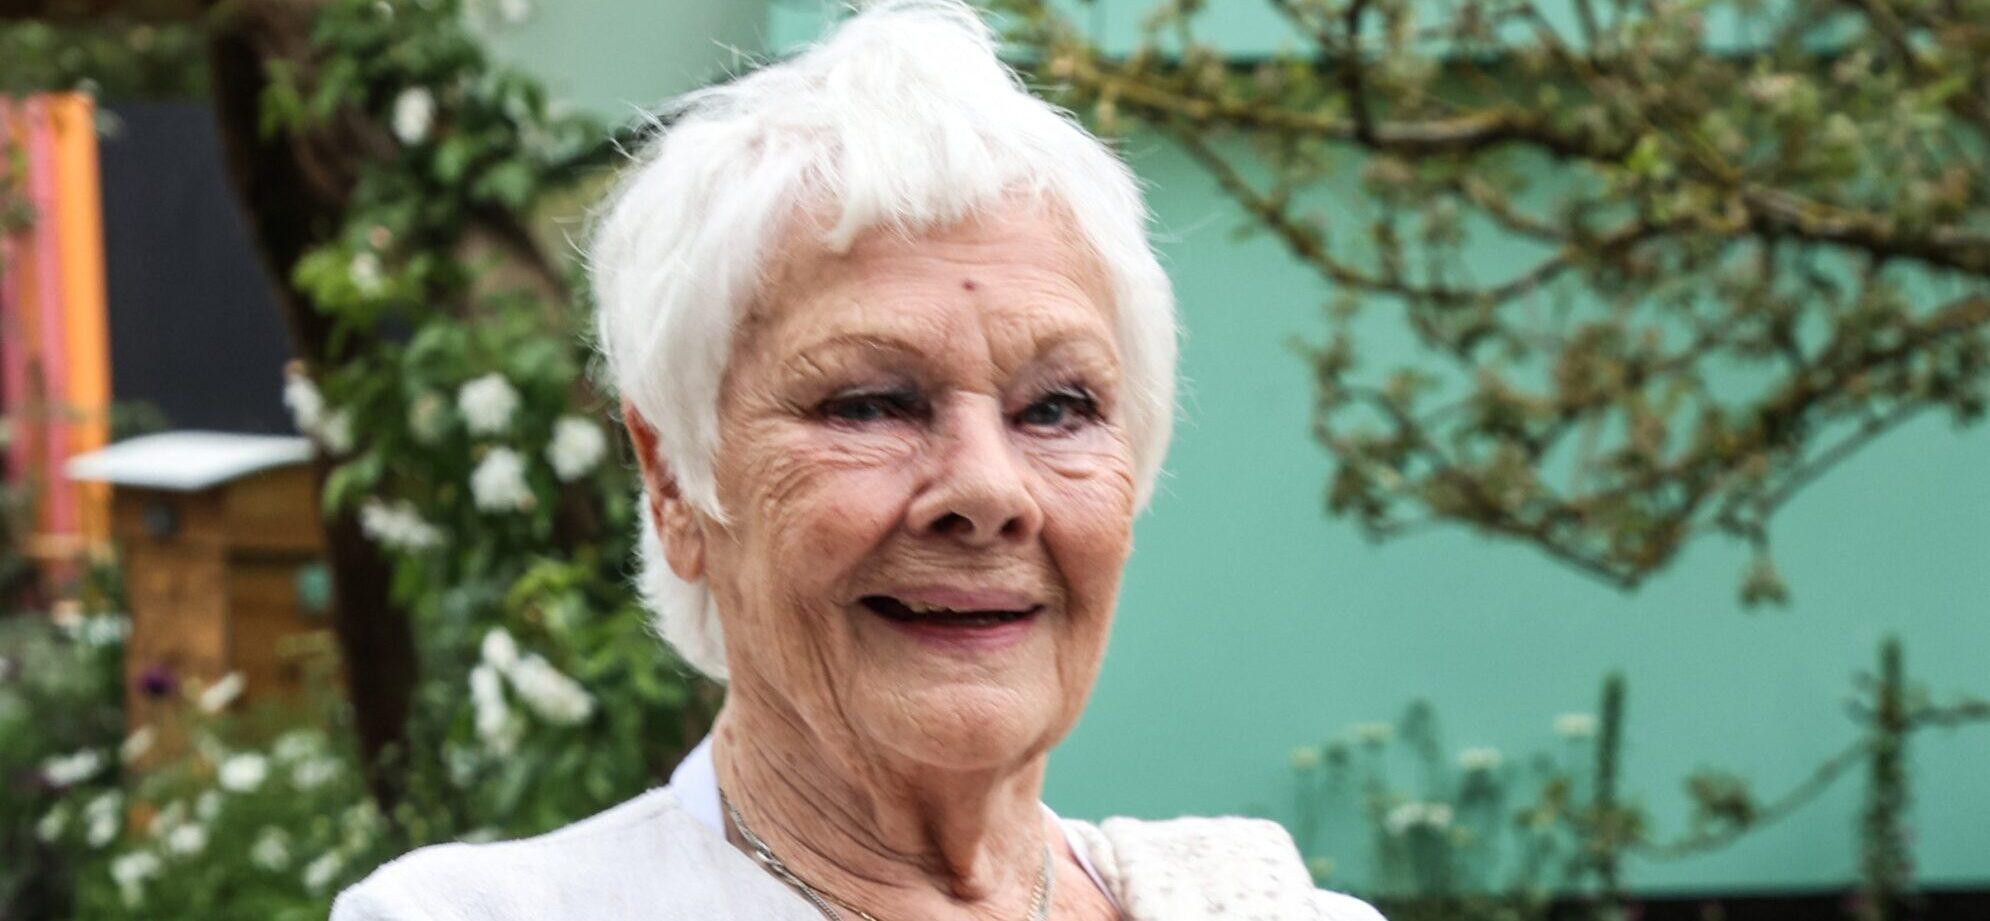 88-Year-Old Judi Dench’s Unintentional ‘Birthday Suit’ Video Chat Surprise!